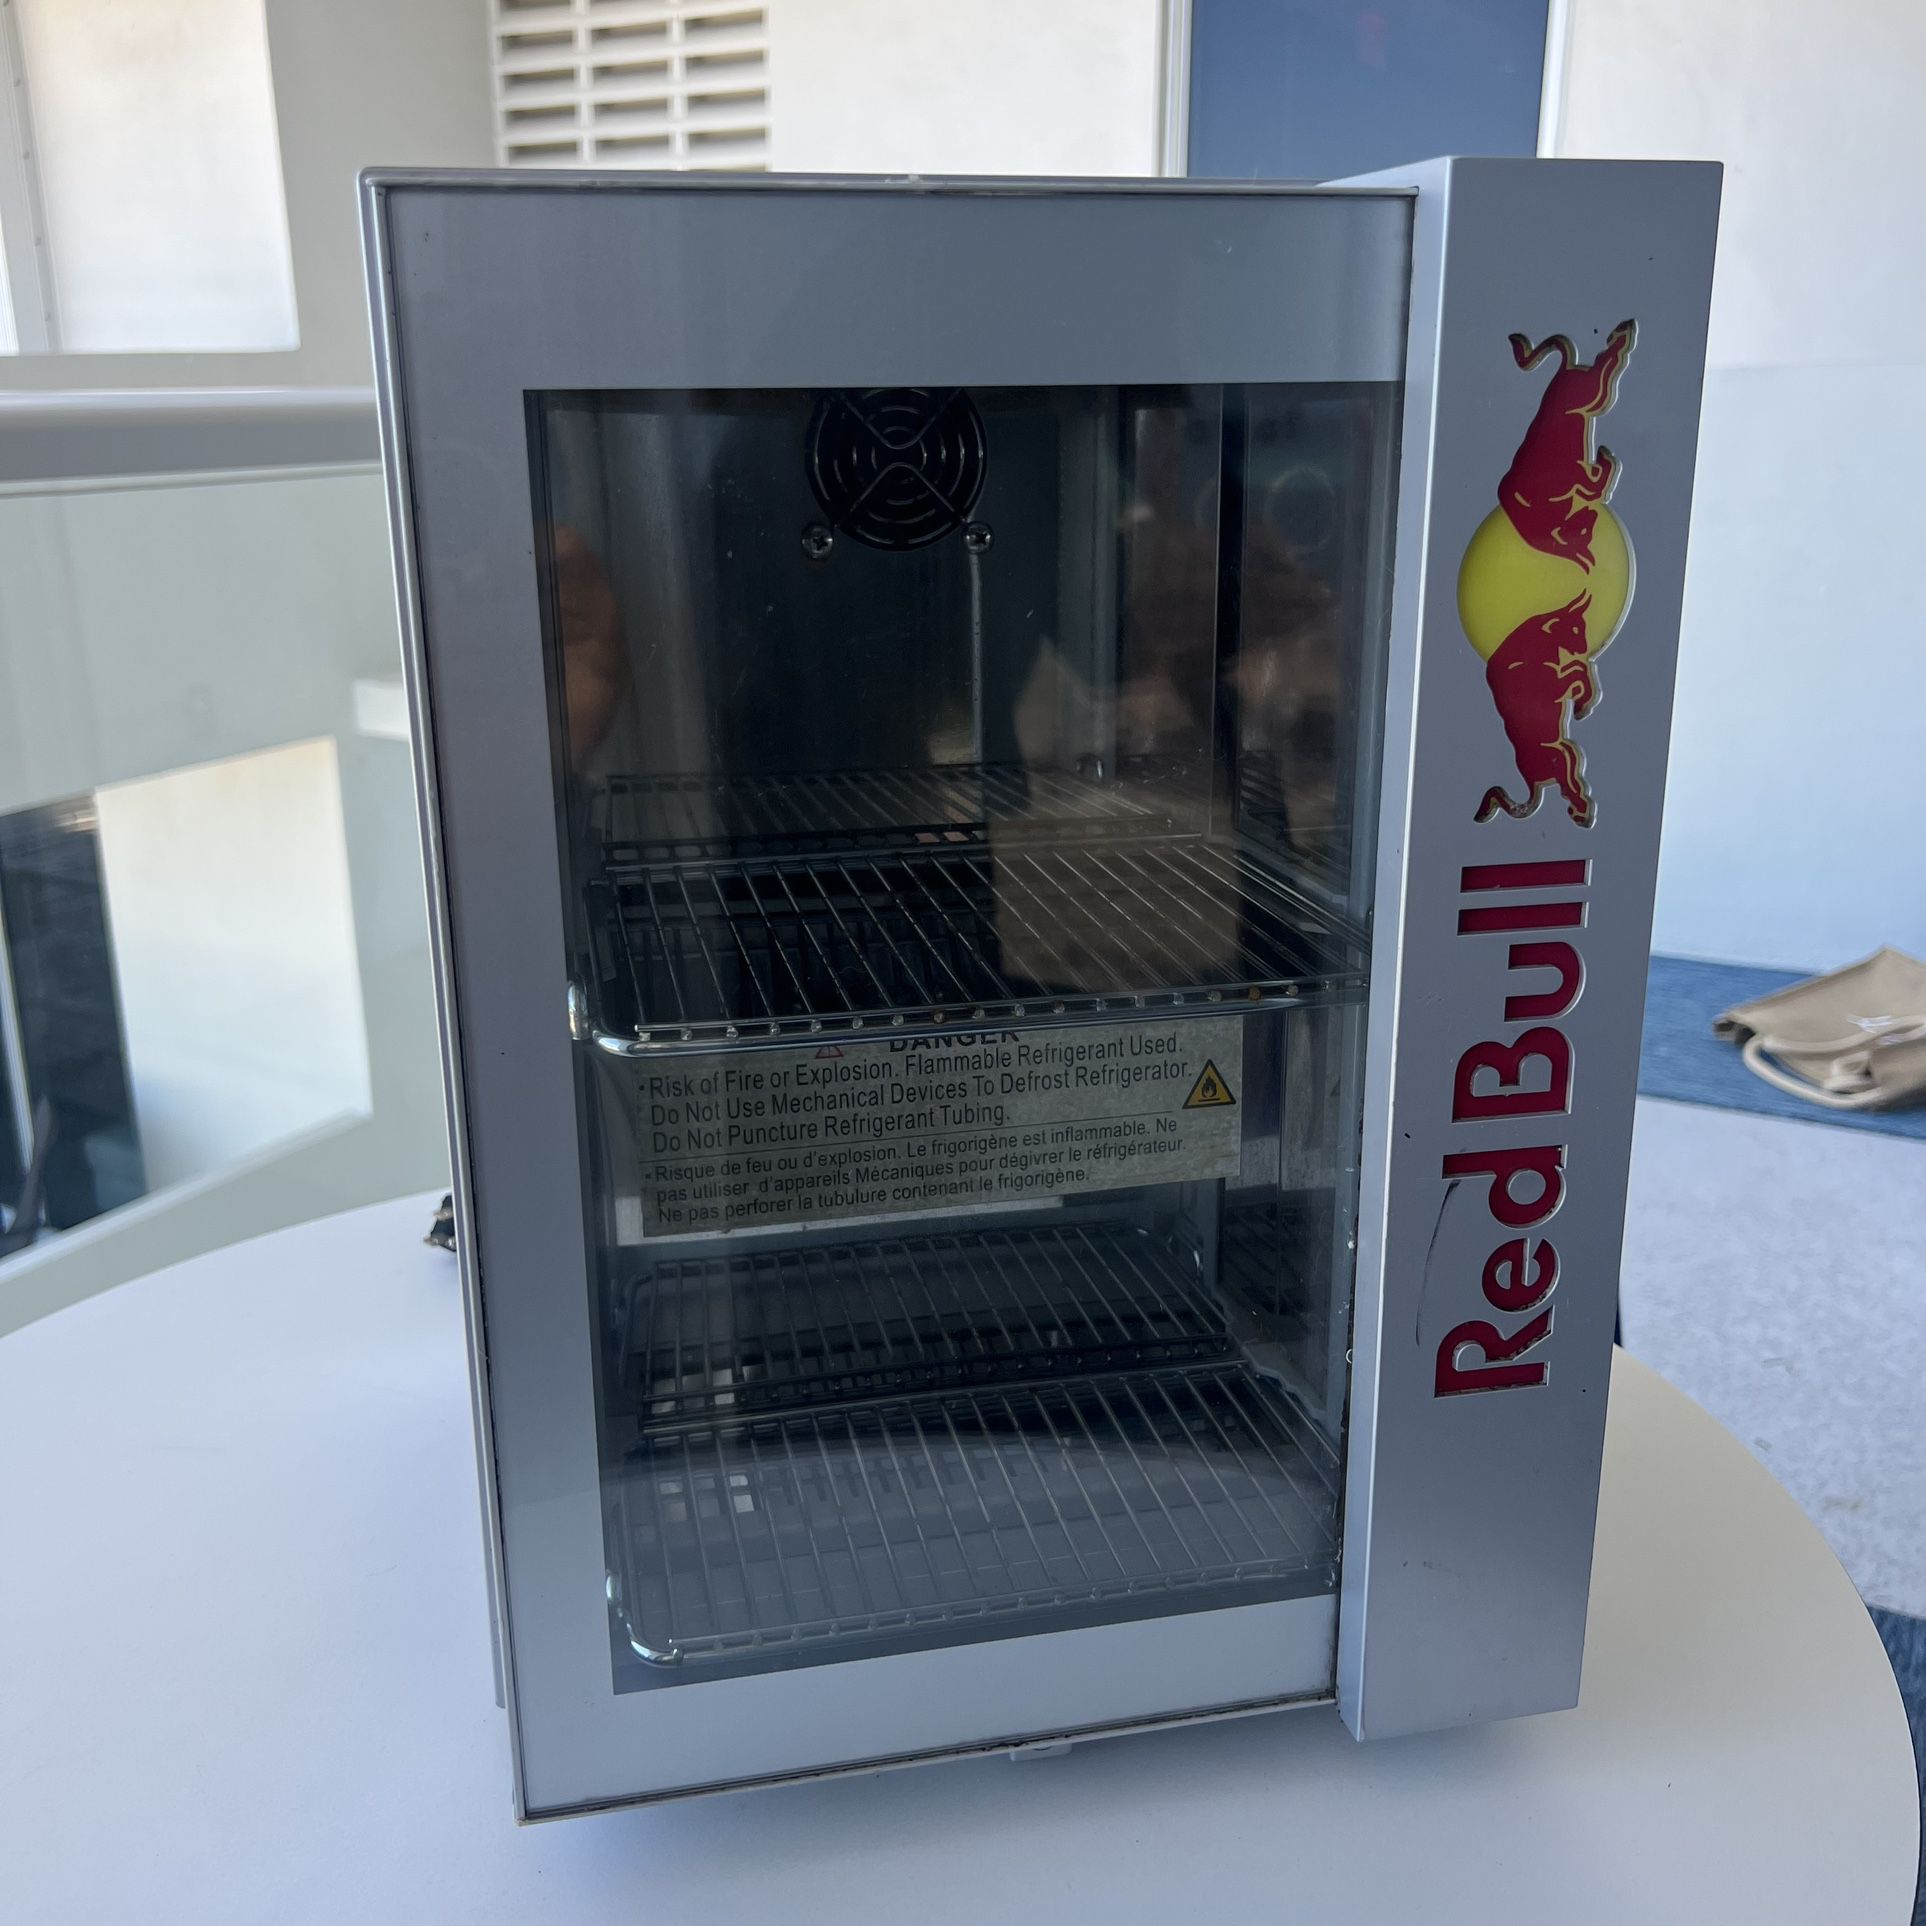 Red Bull Baby Cooler 2020 Eco Lef for Sale in Jersey City, NJ - OfferUp